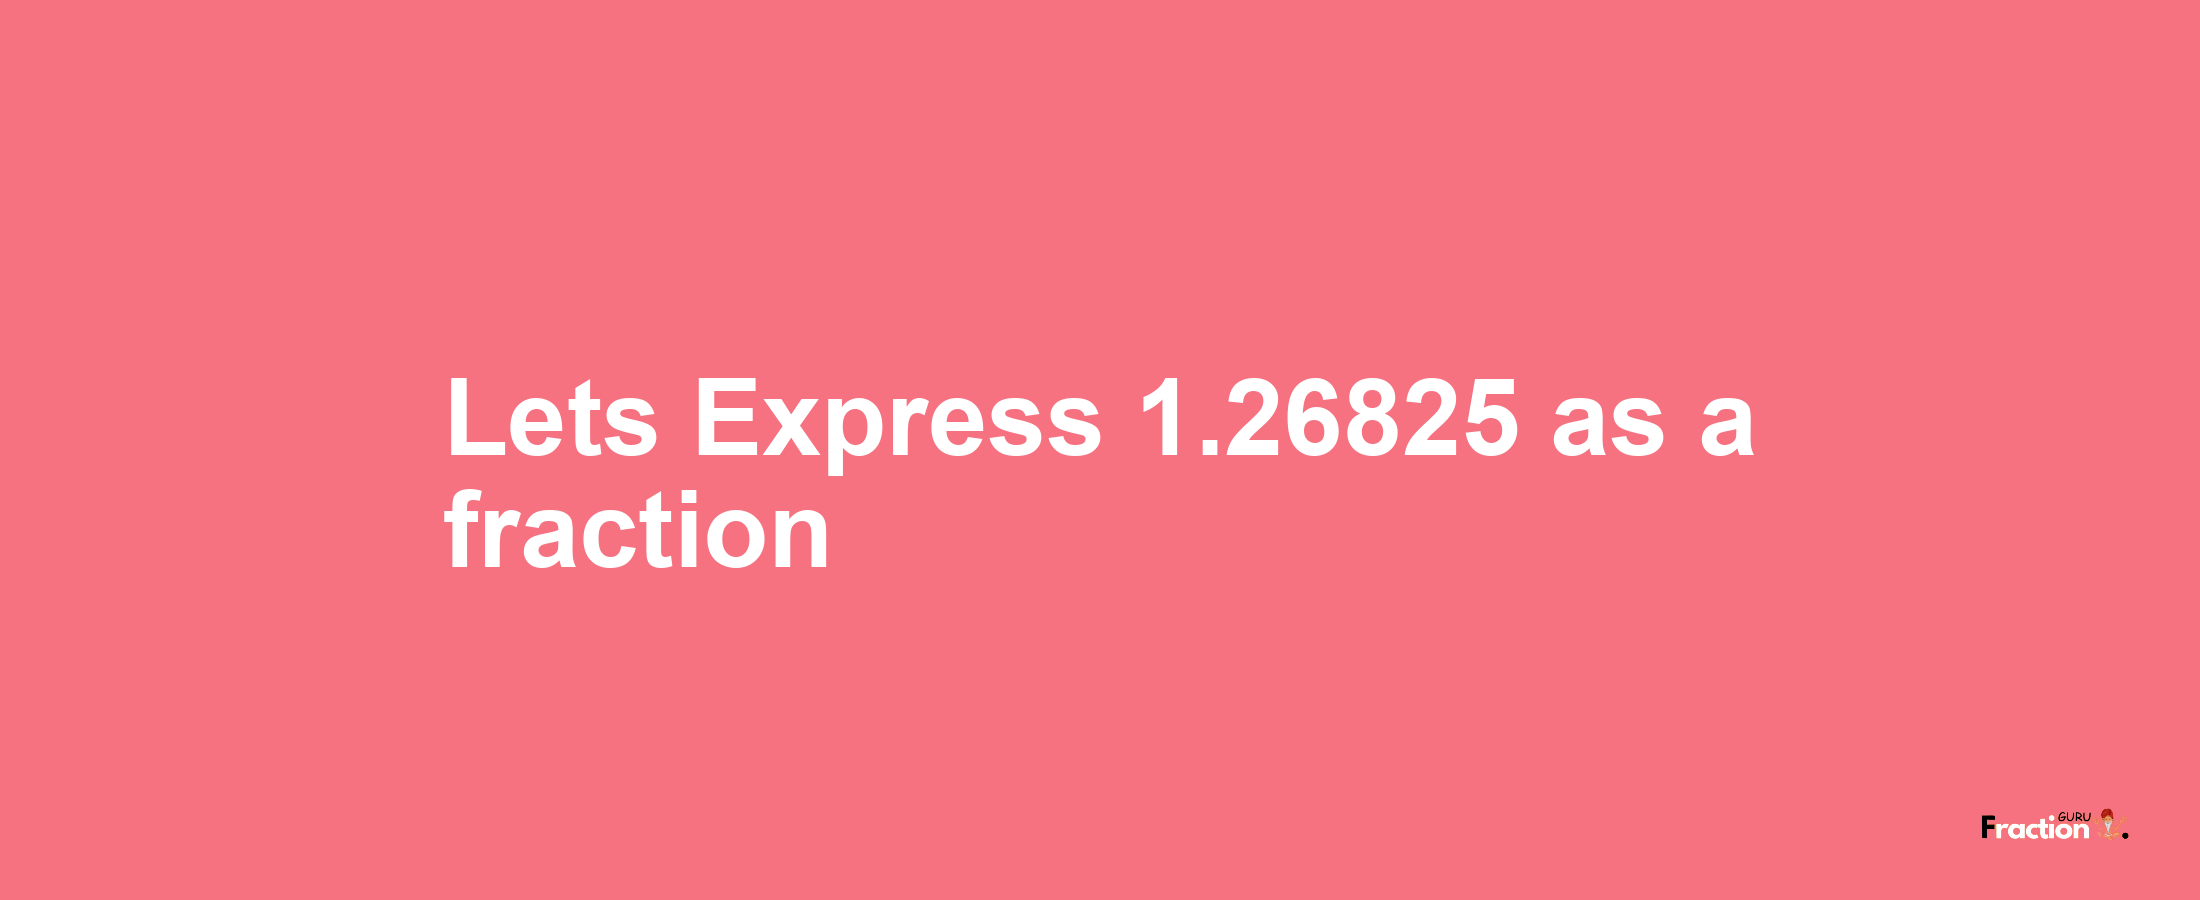 Lets Express 1.26825 as afraction